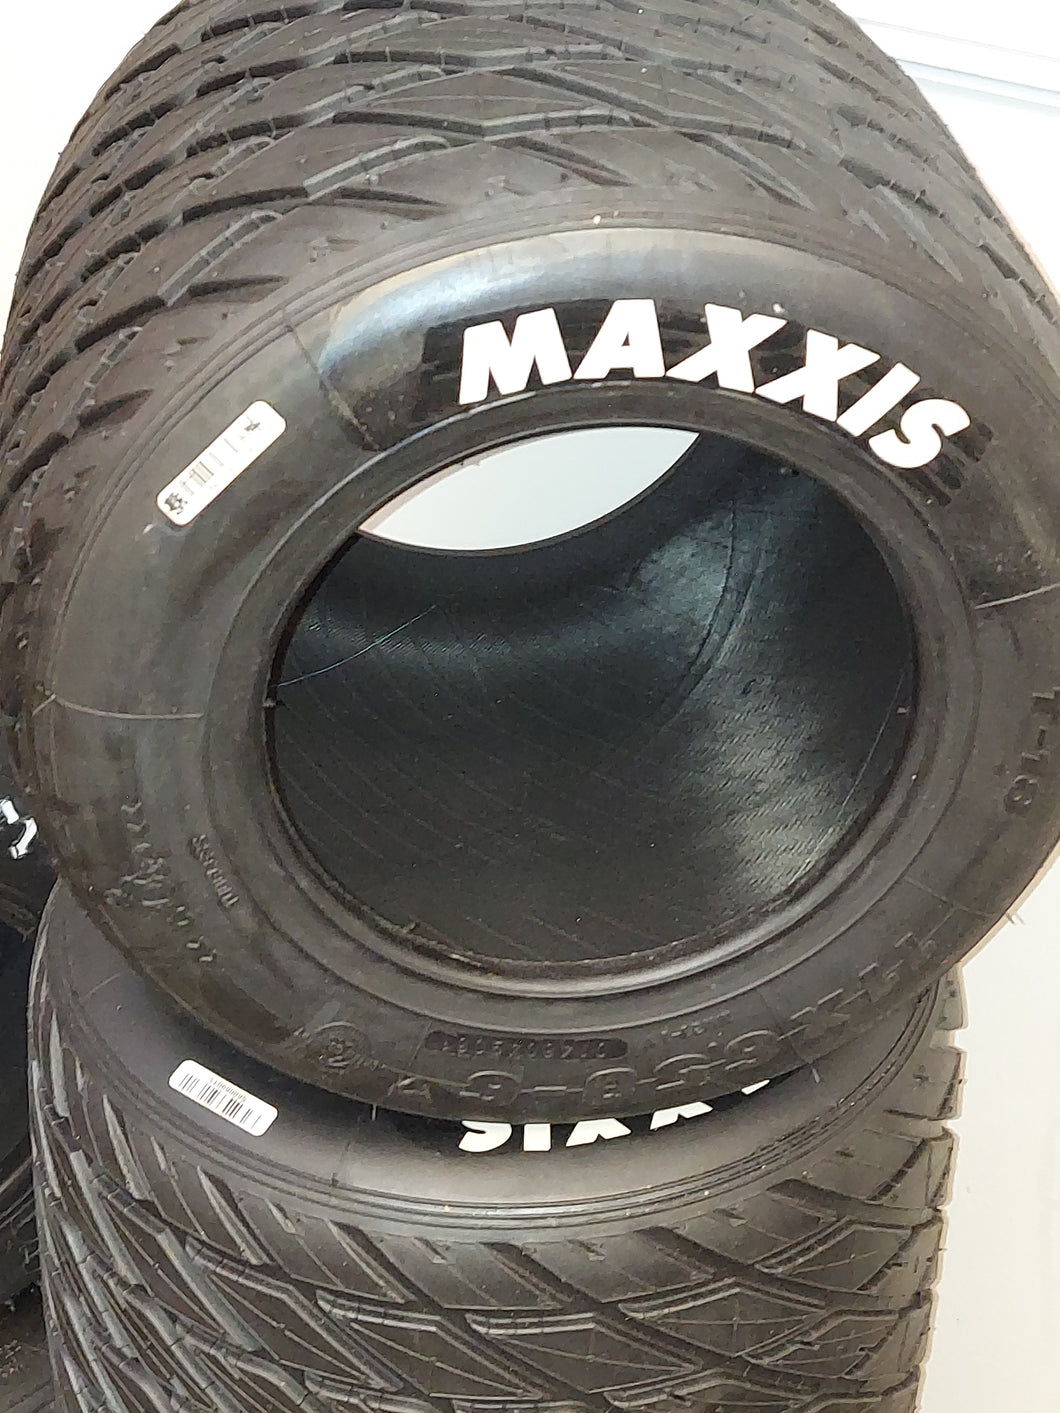 Maxxis treaded tire for Onewheel XR